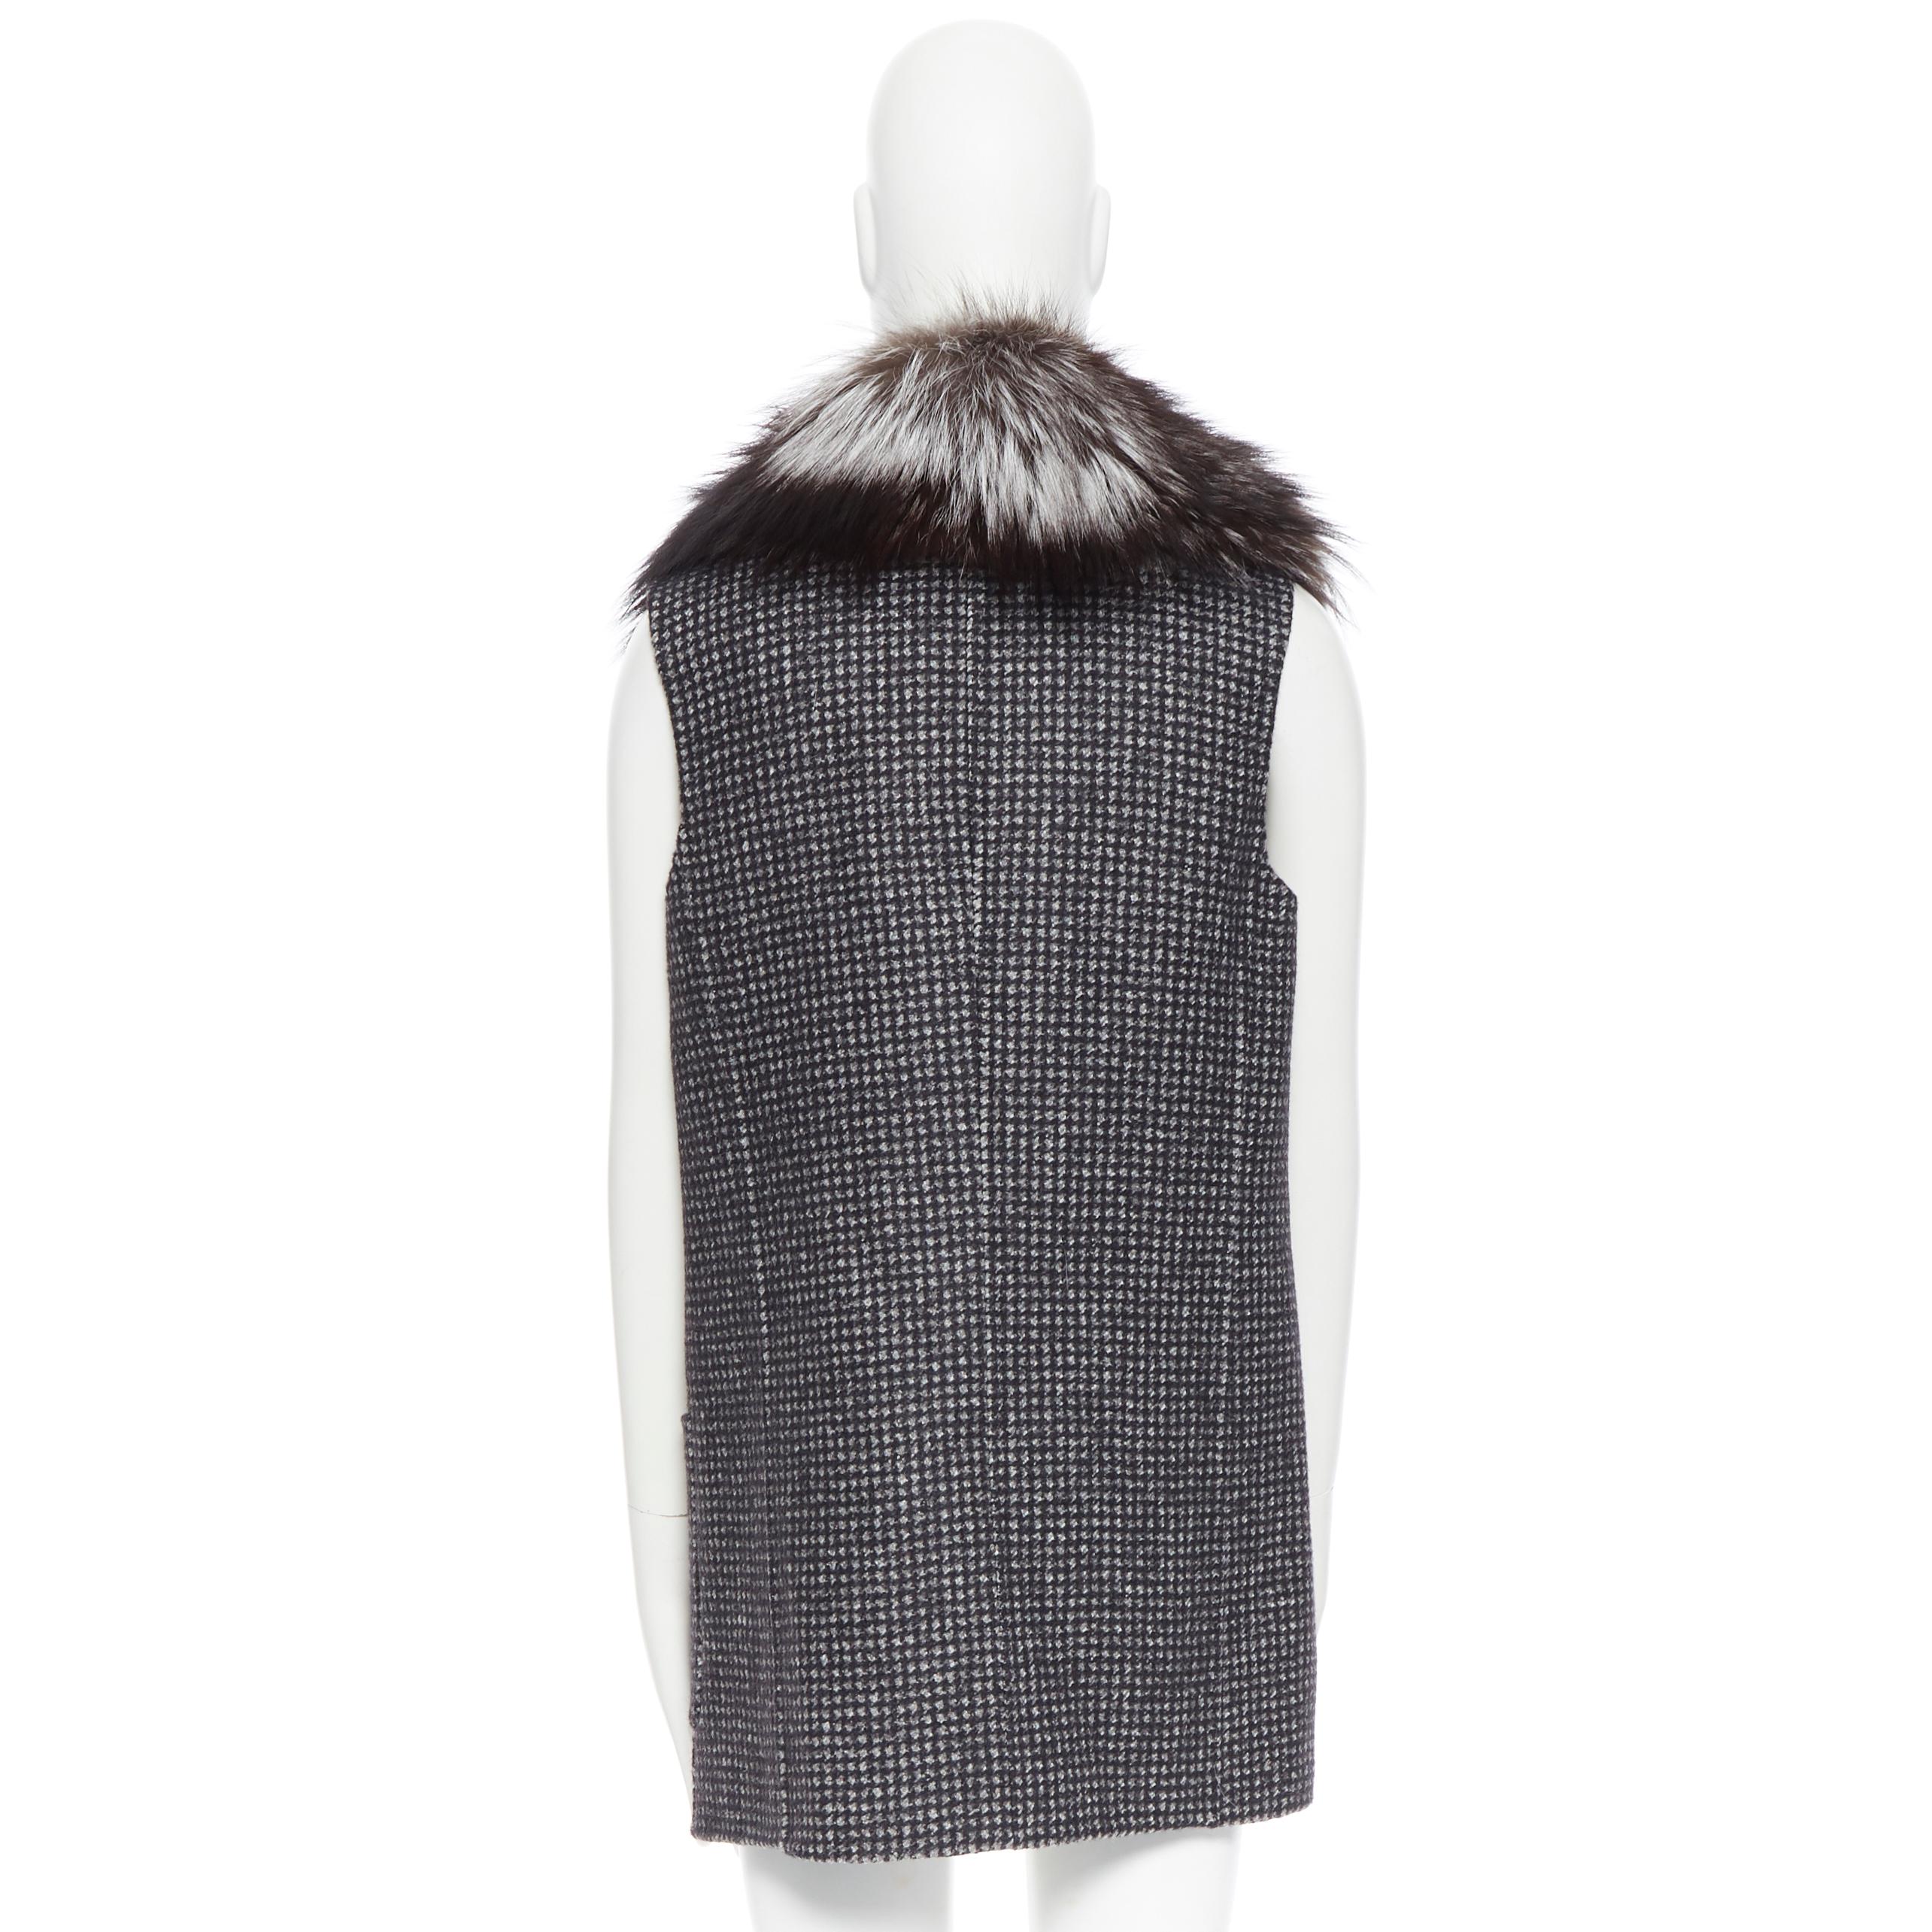 Gray new MICHAEL KORS COLLECTION AW17 fox fur collar grey checked  wool vest US2 XS